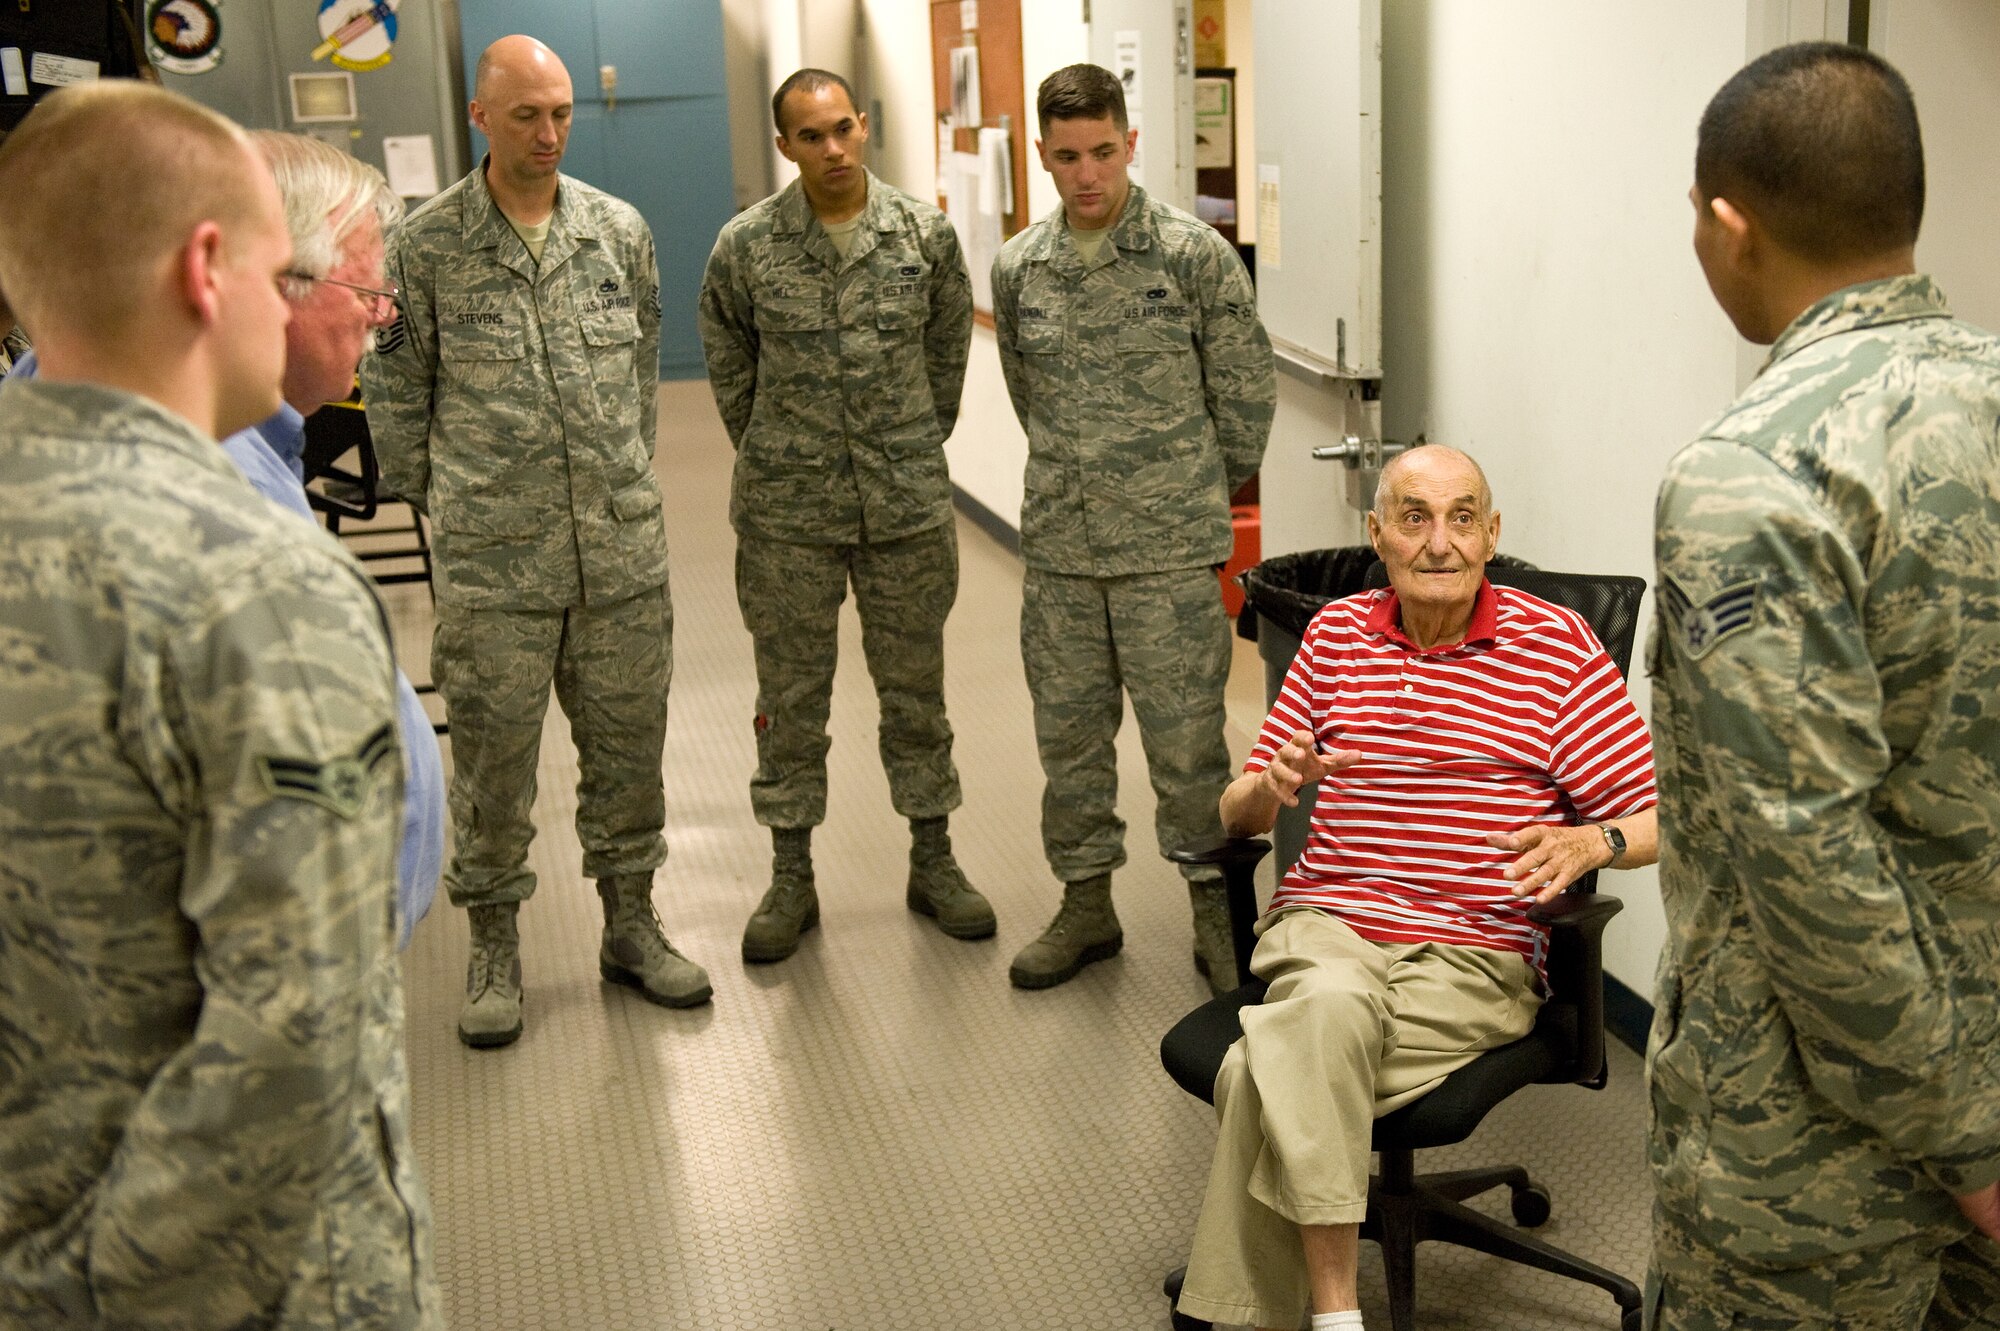 Retired Chief Master Sgt. George H. Fuller Sr., founder of the Air Force’s first egress shops, shares his experiences with 4th Component Maintenance Squadron Airmen during a tour, April 30, 2014, at Seymour Johnson Air Force Base, North Carolina. Fuller attended the first egress training in 1953 and started egress shops all over the Air Force. (U.S. Air Force photo/Airman 1st Class Aaron J. Jenne)